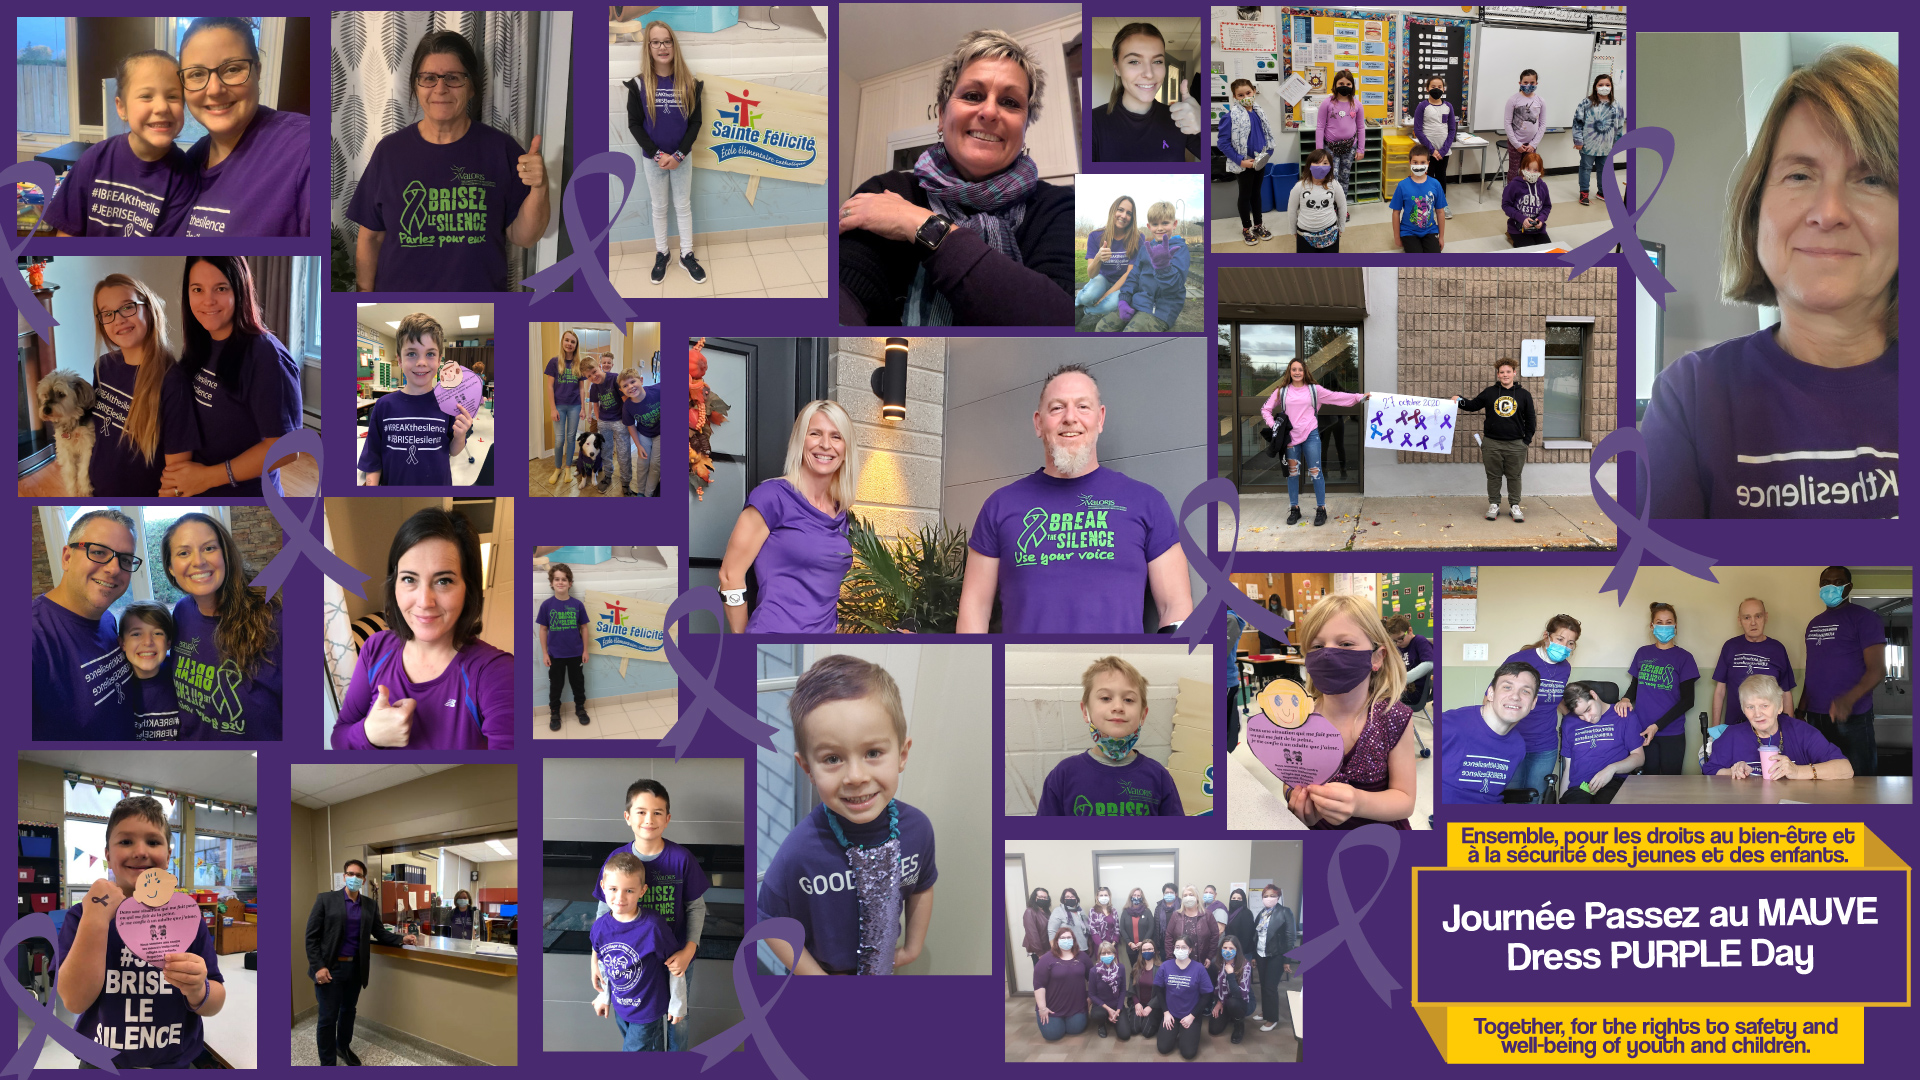 Mosaic with photos of people who participated in the Pass to Purple day